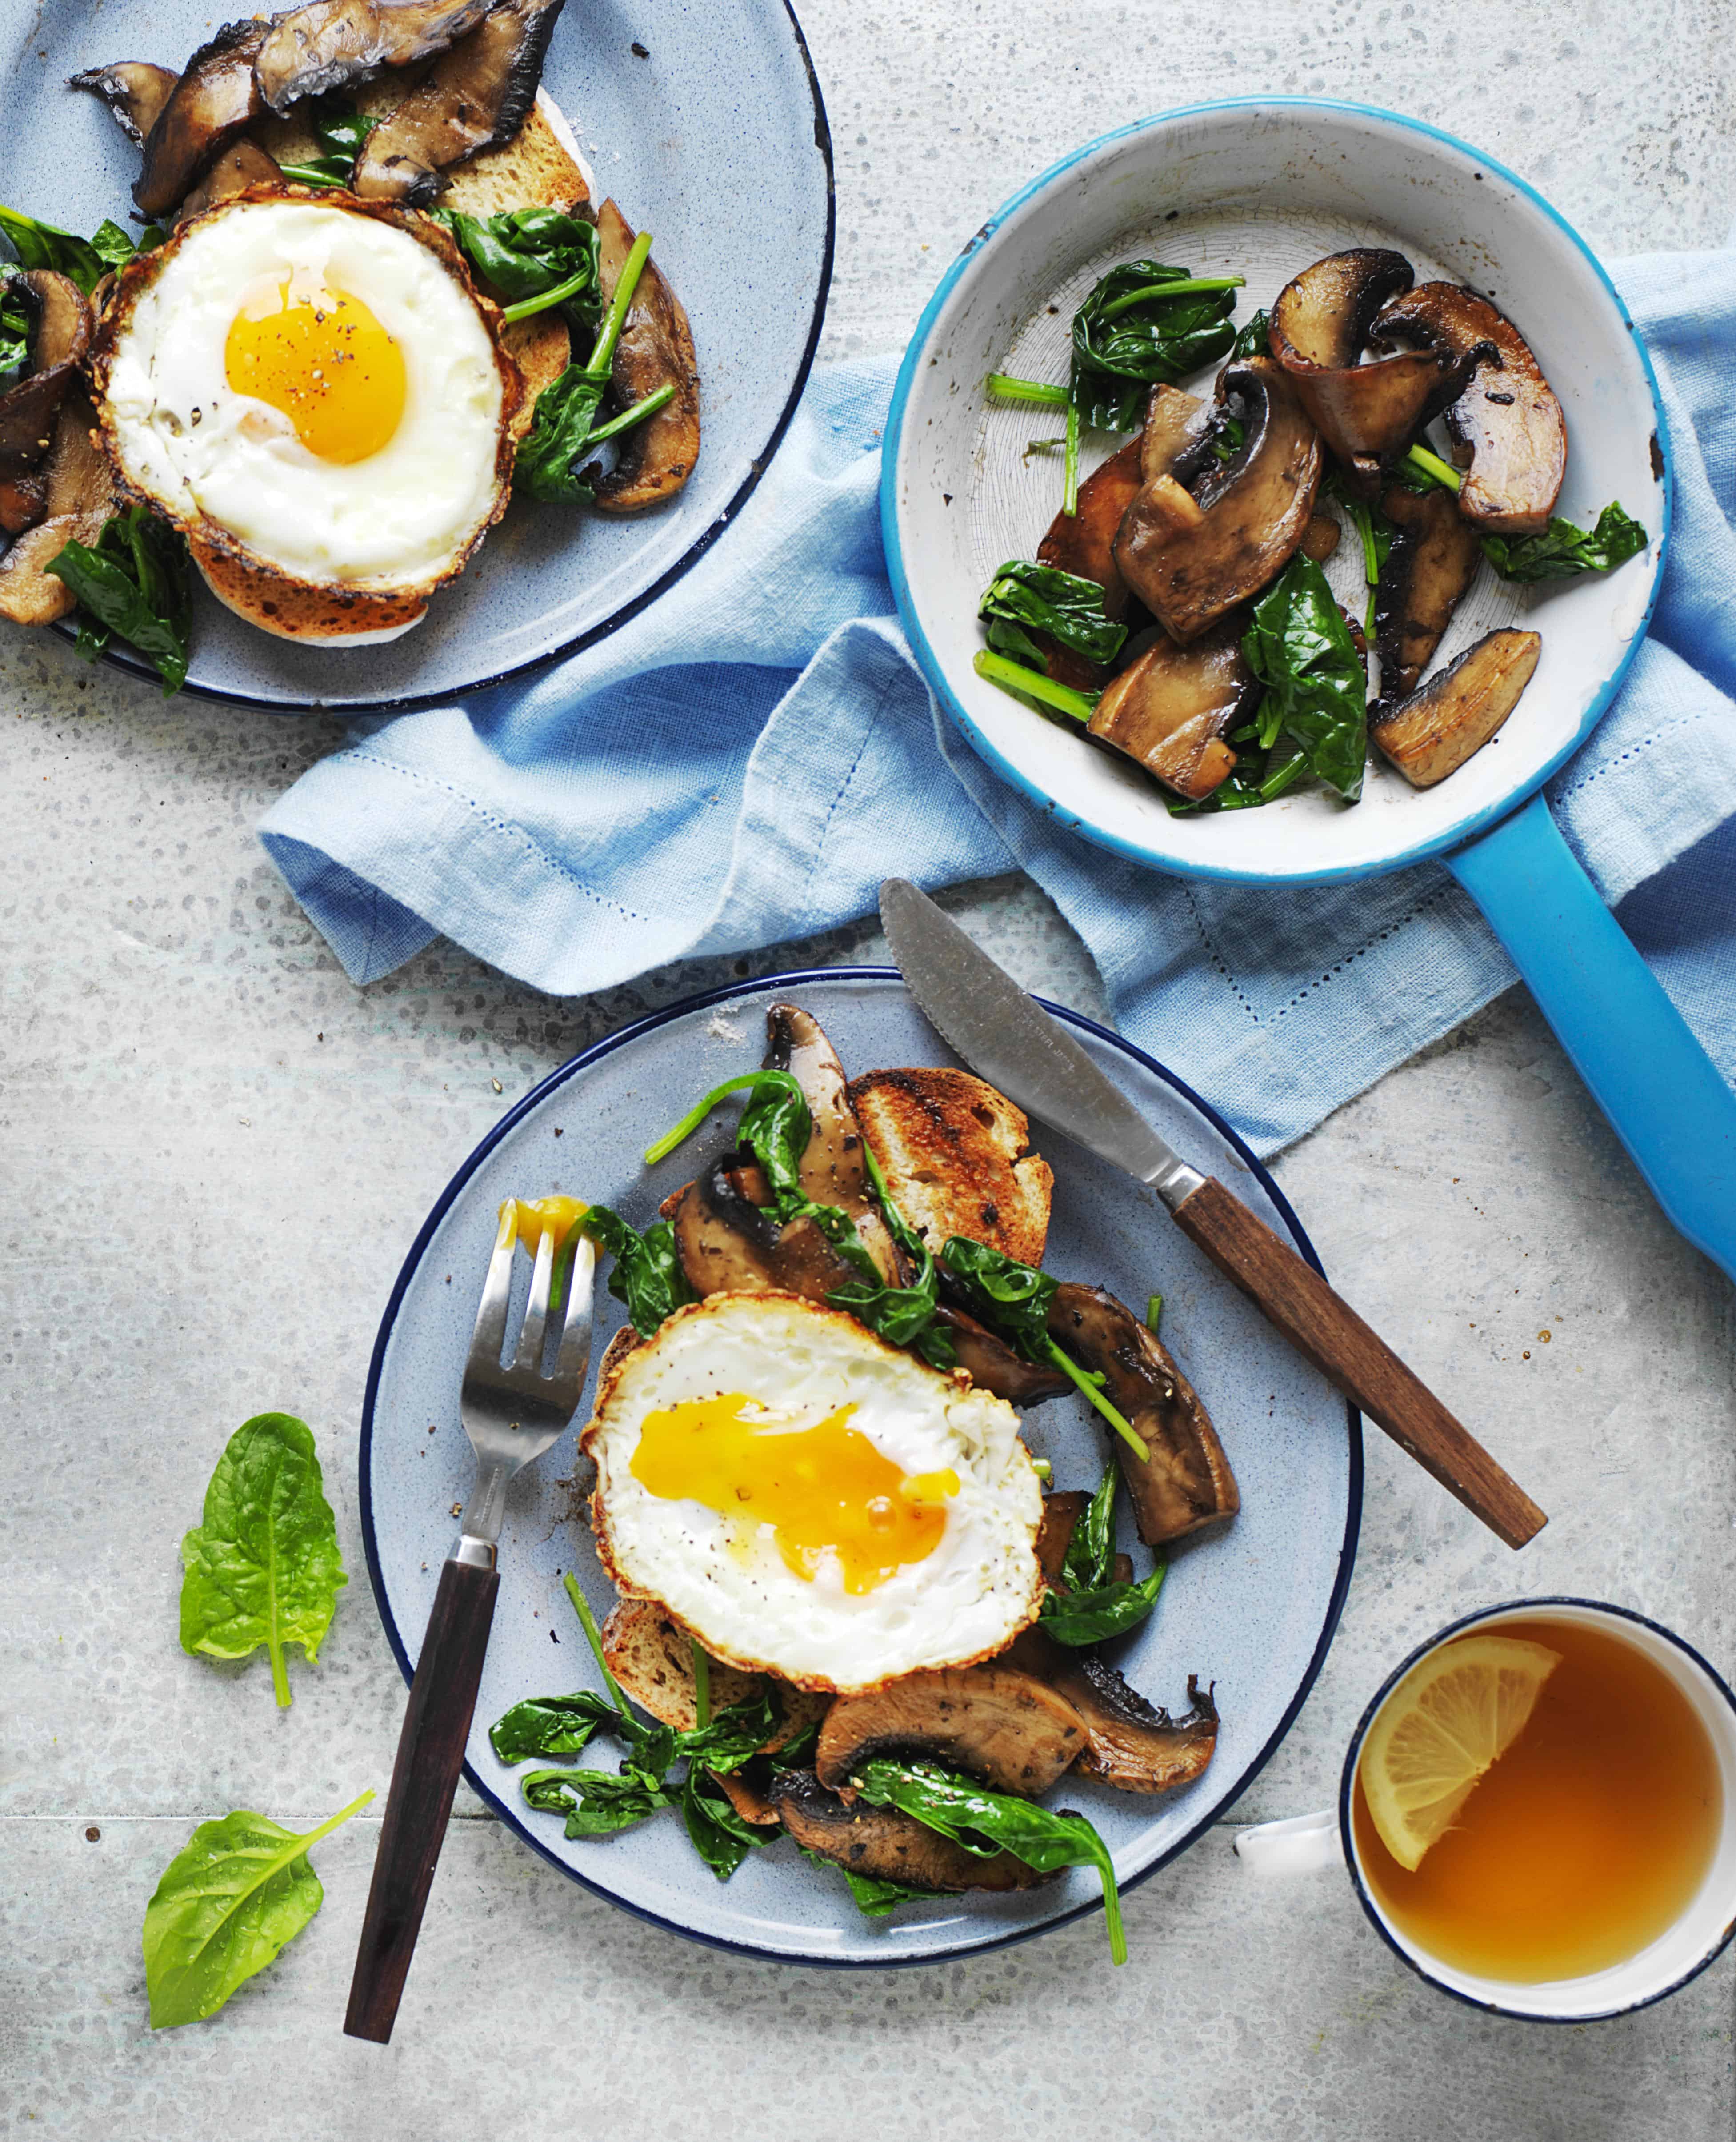 Fried egg with mushrooms and spinach with a cup of lemon tea